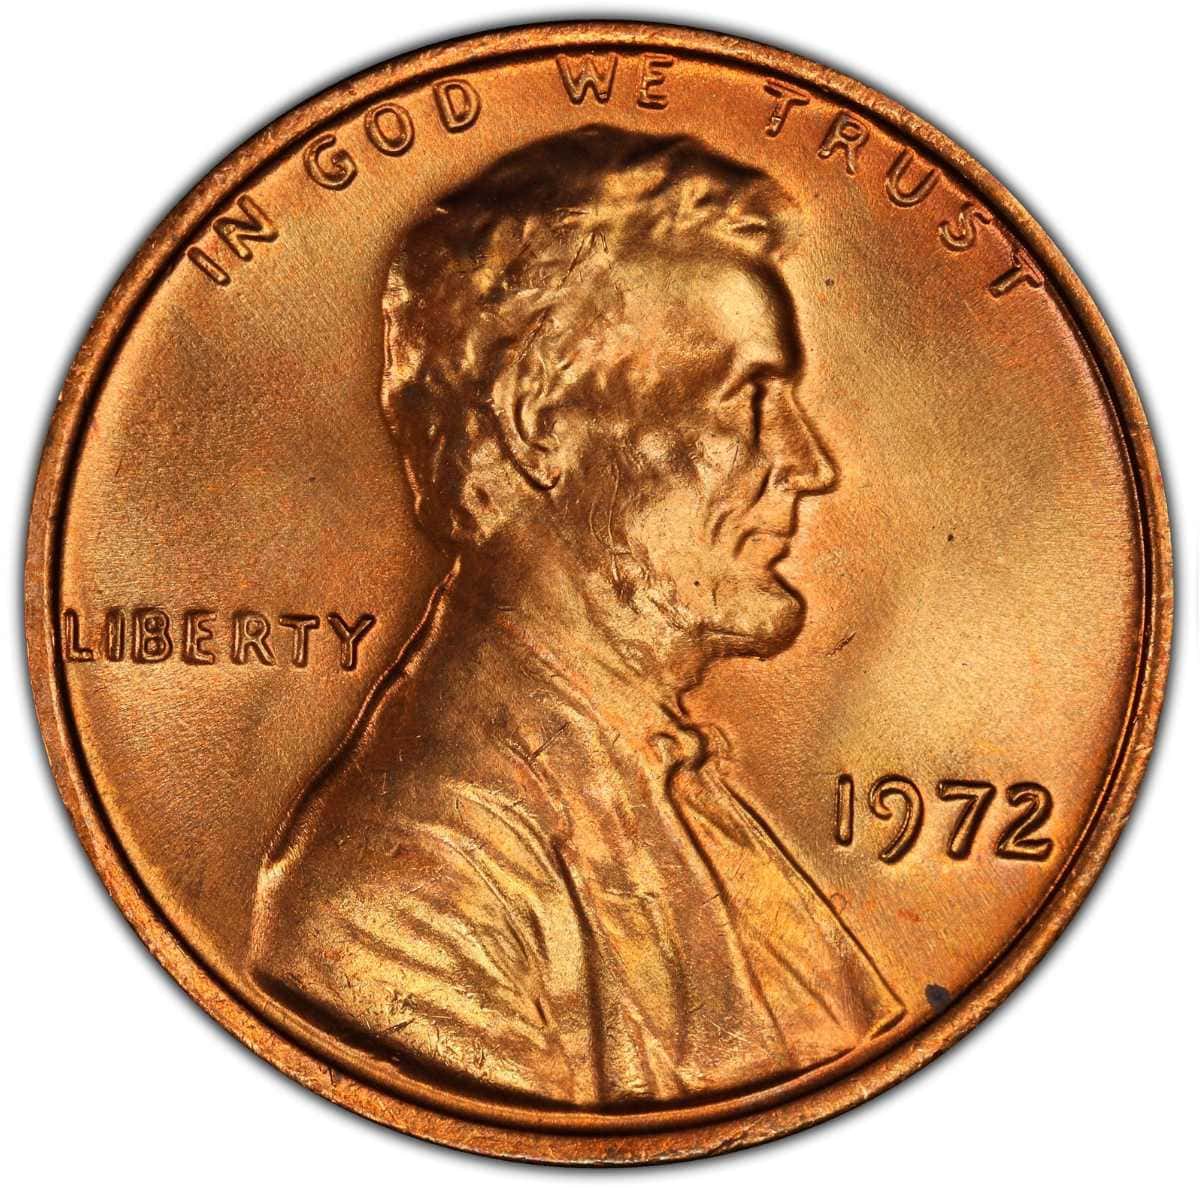 1972 Penny Historical Background